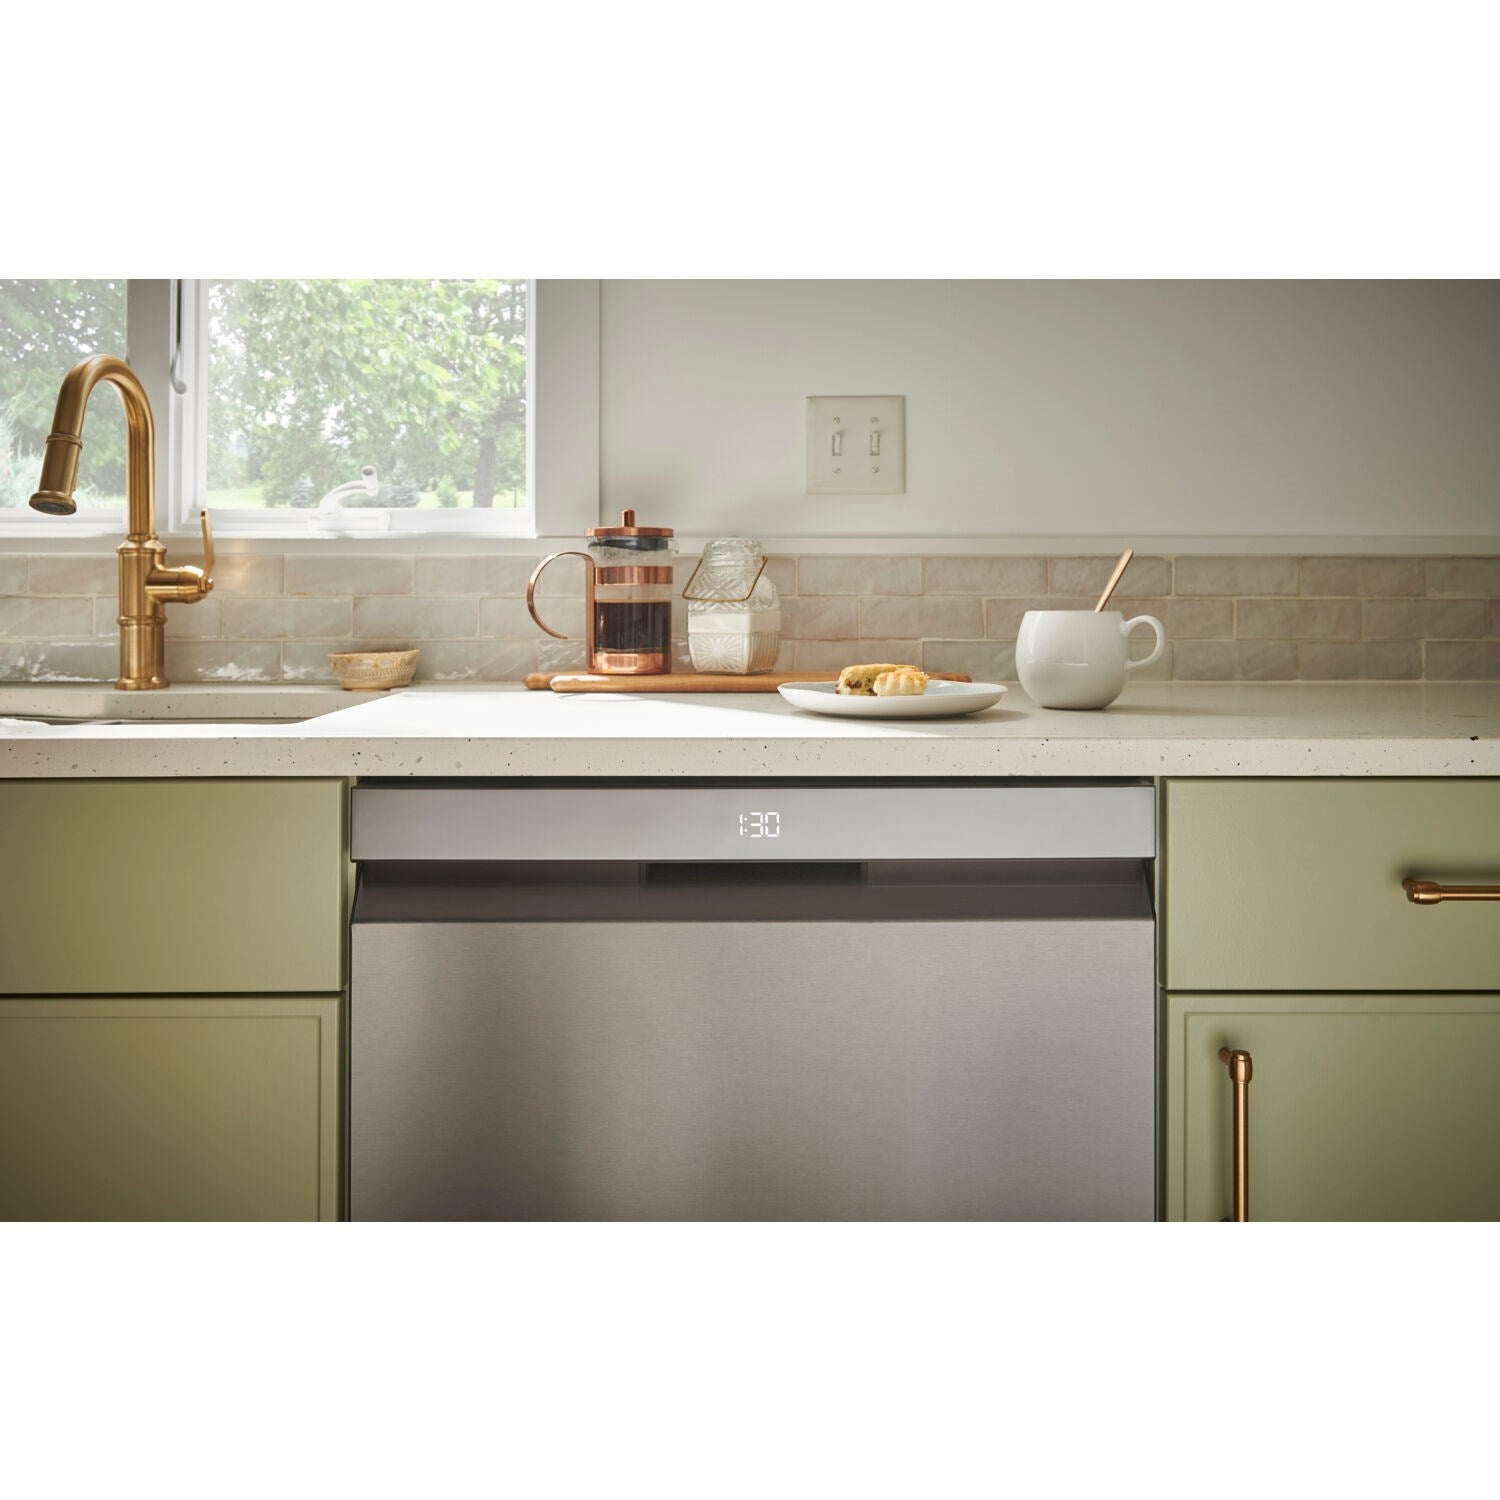 LG Fully Integrated Built In Dishwashers LDPS6762S